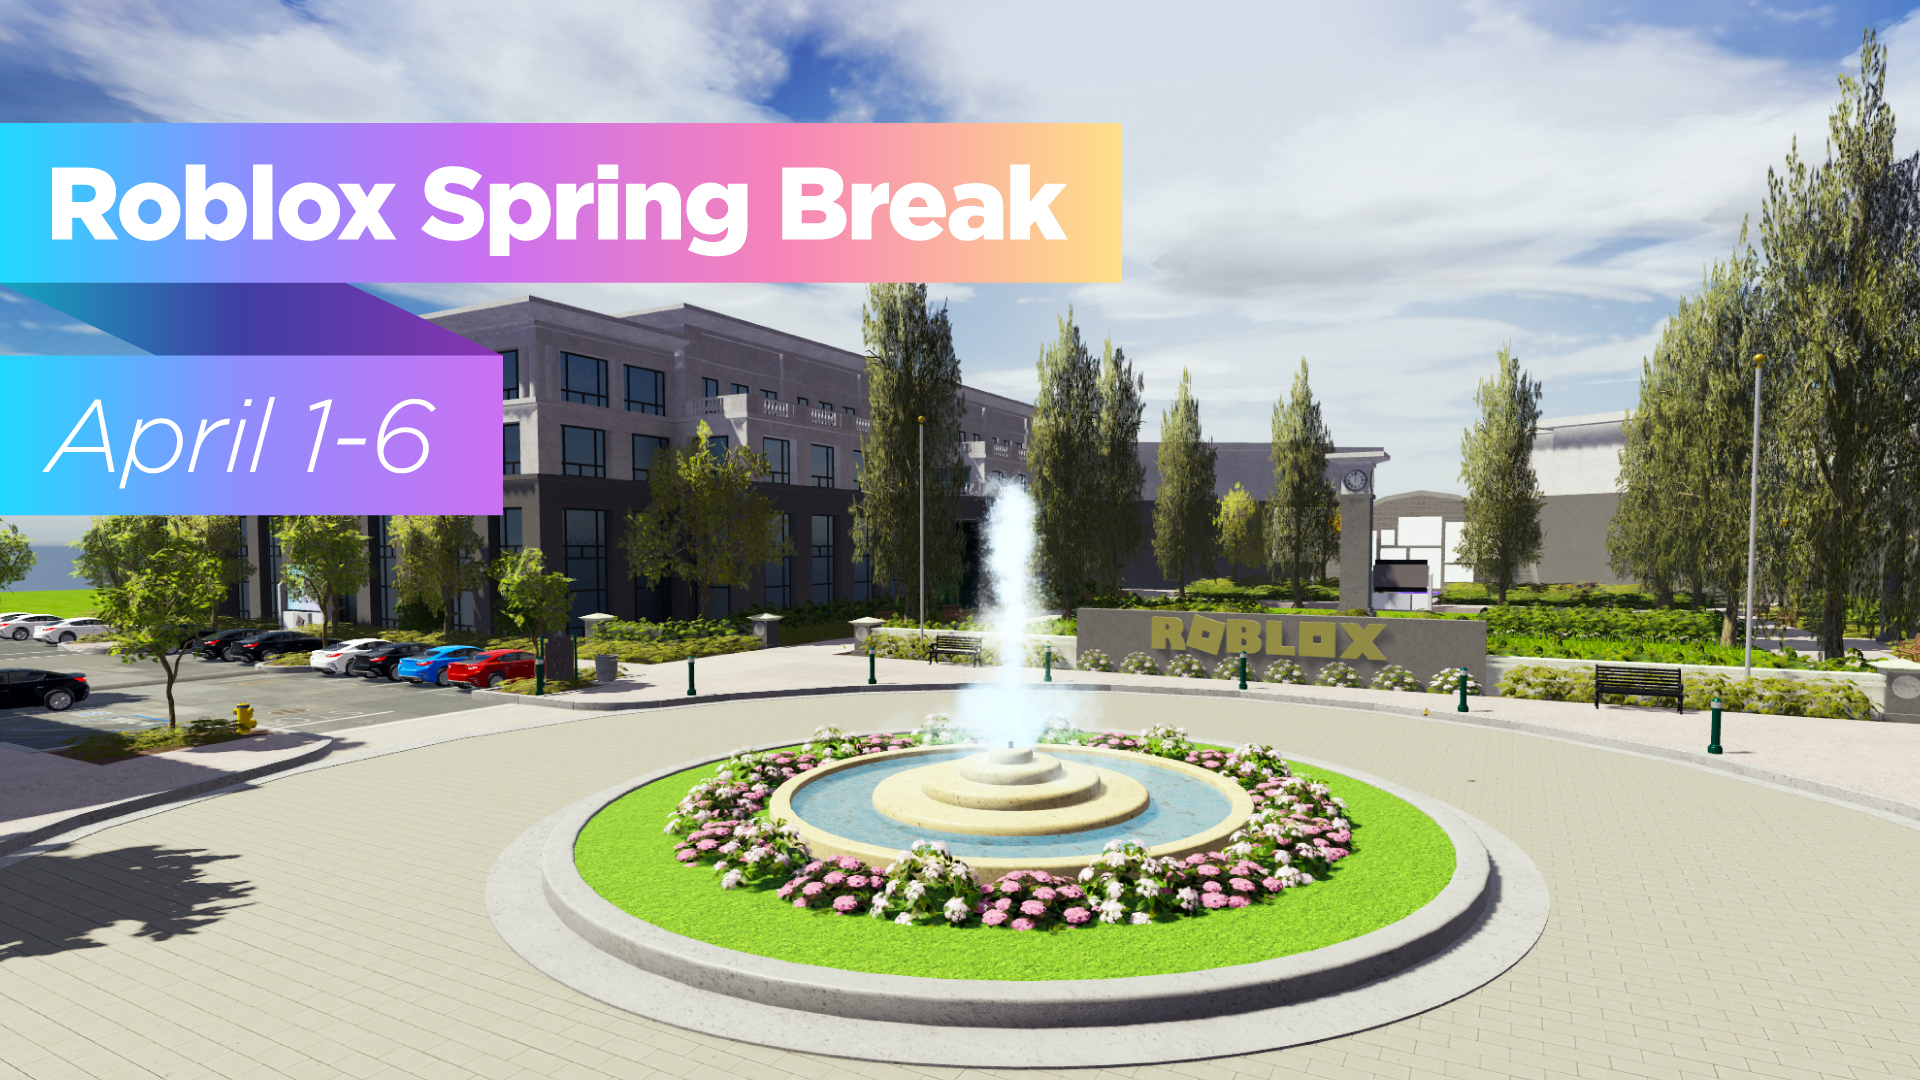 Why We Re Bringing Spring Break To Roblox Employees Roblox Blog - how to make a fountion in roblox 2021